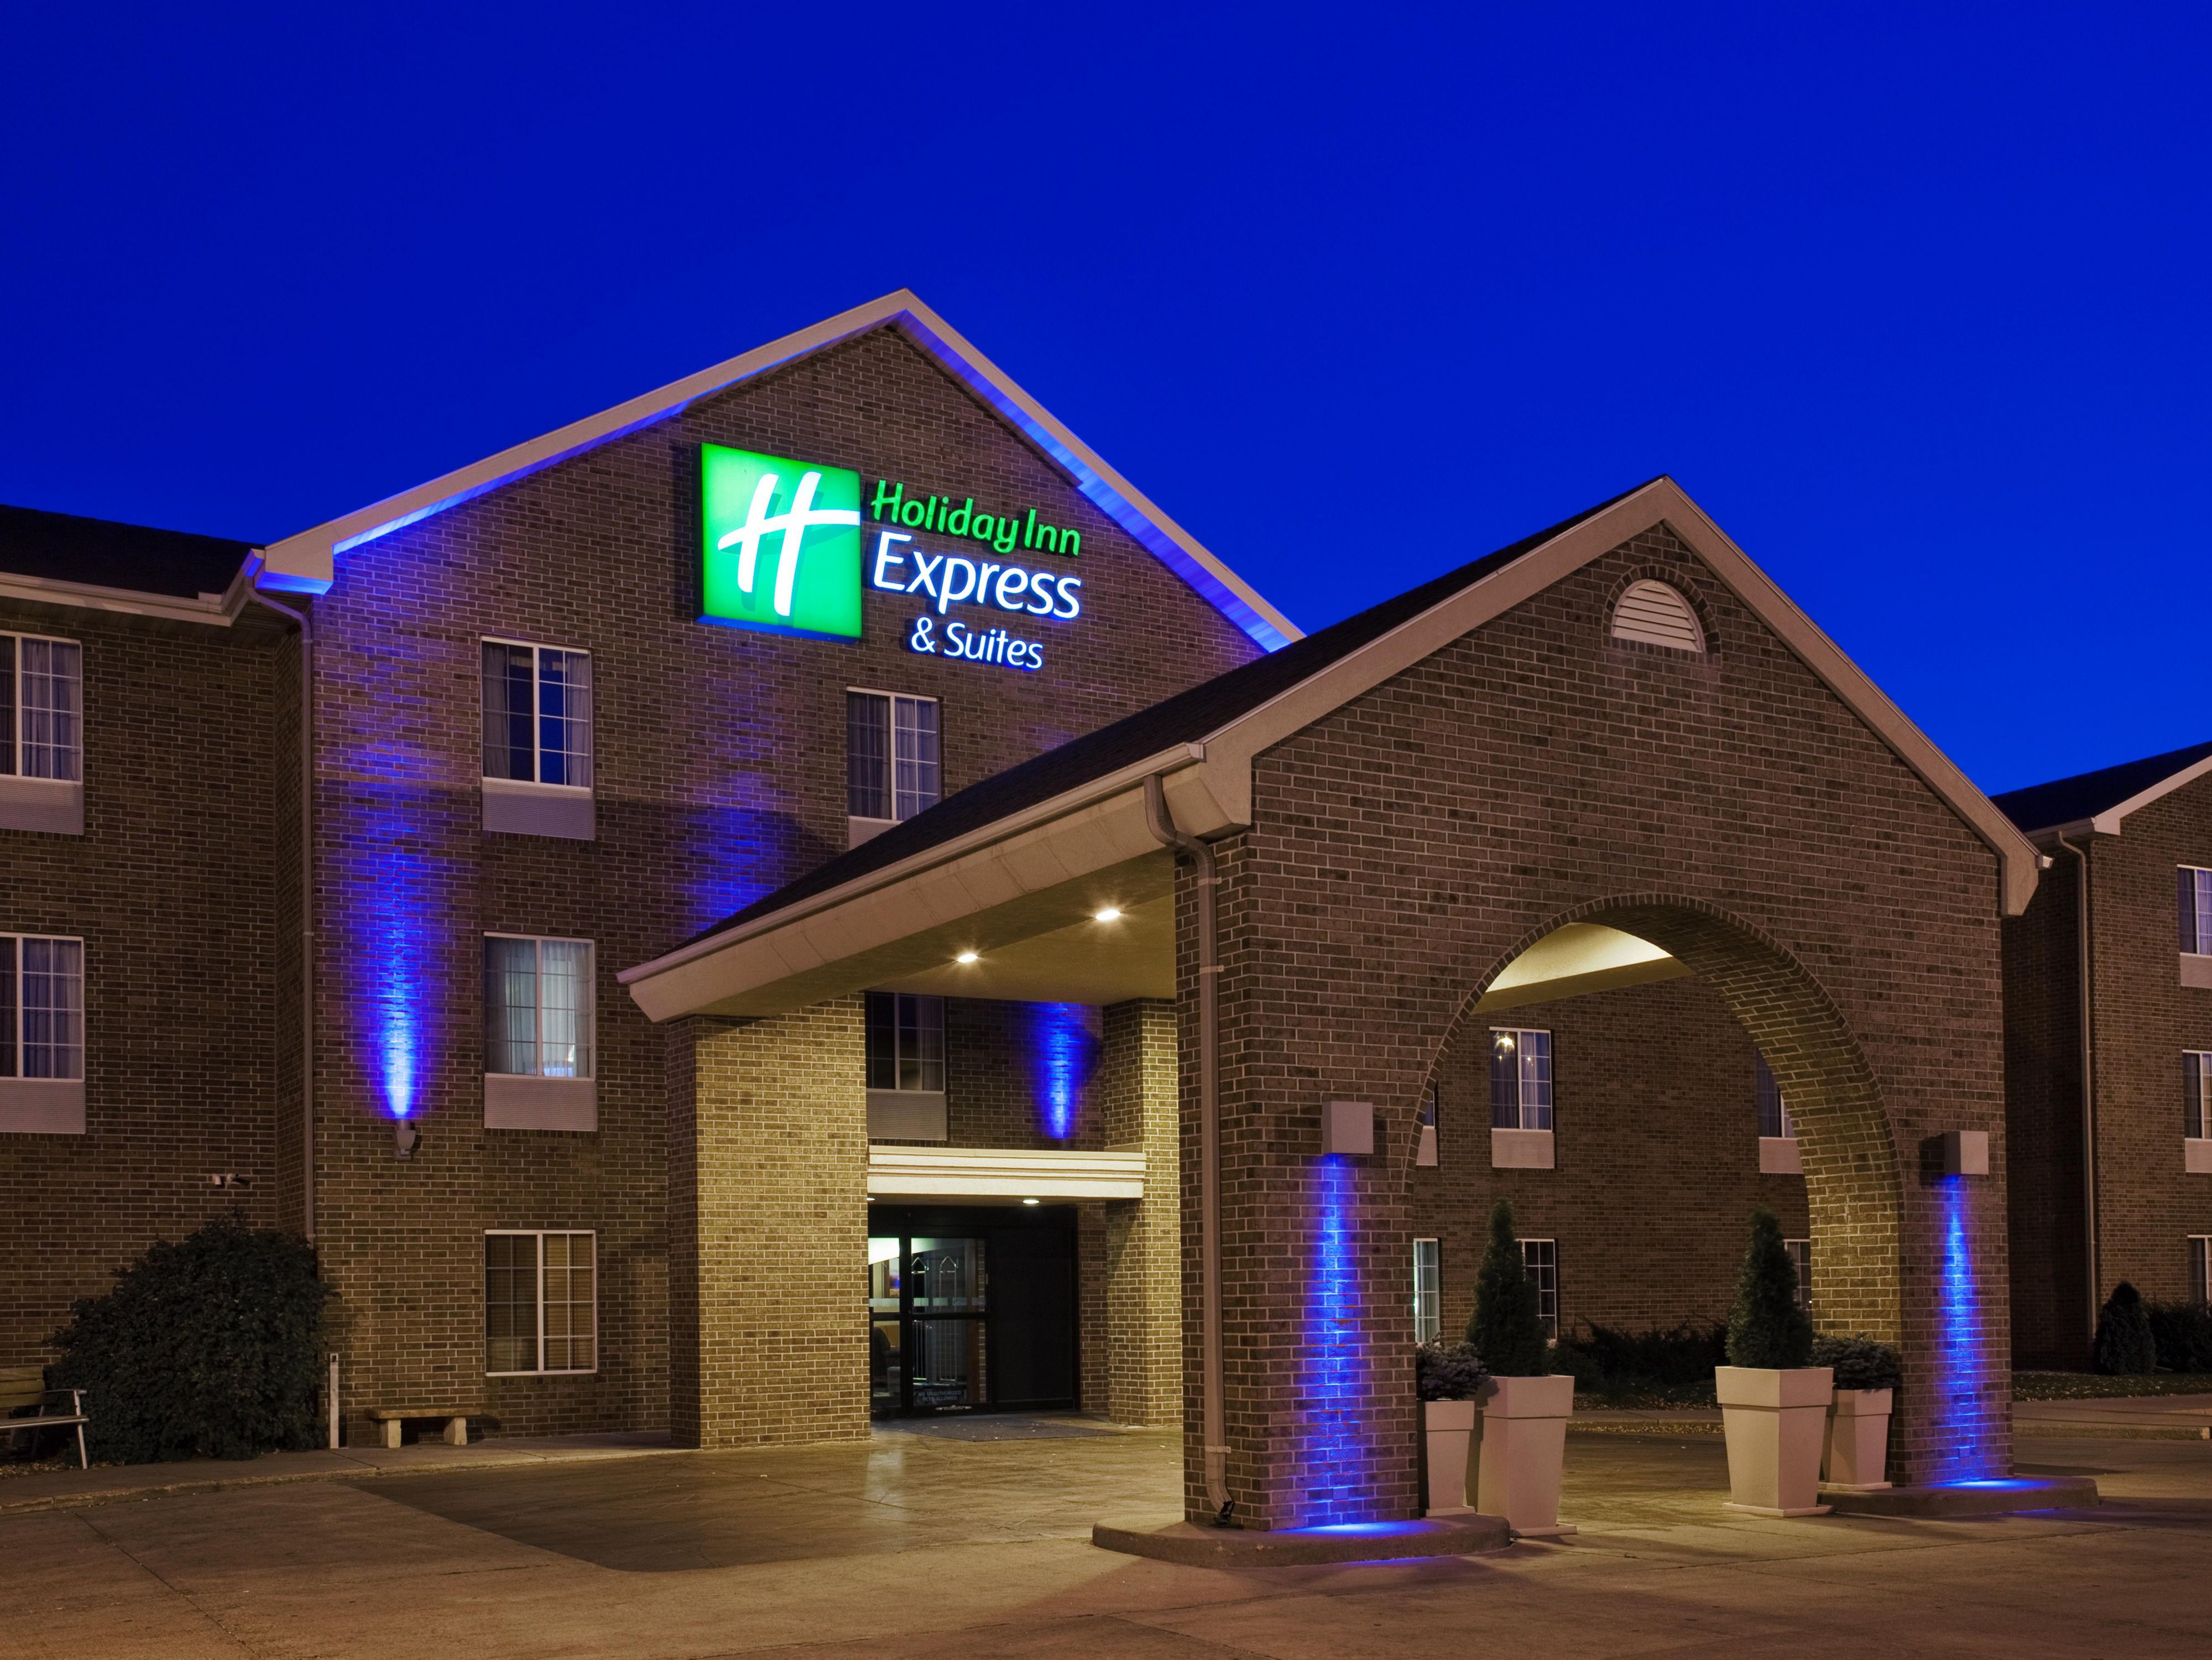 Hotels Near I 90 In Sioux Falls Sd - My Adele Store